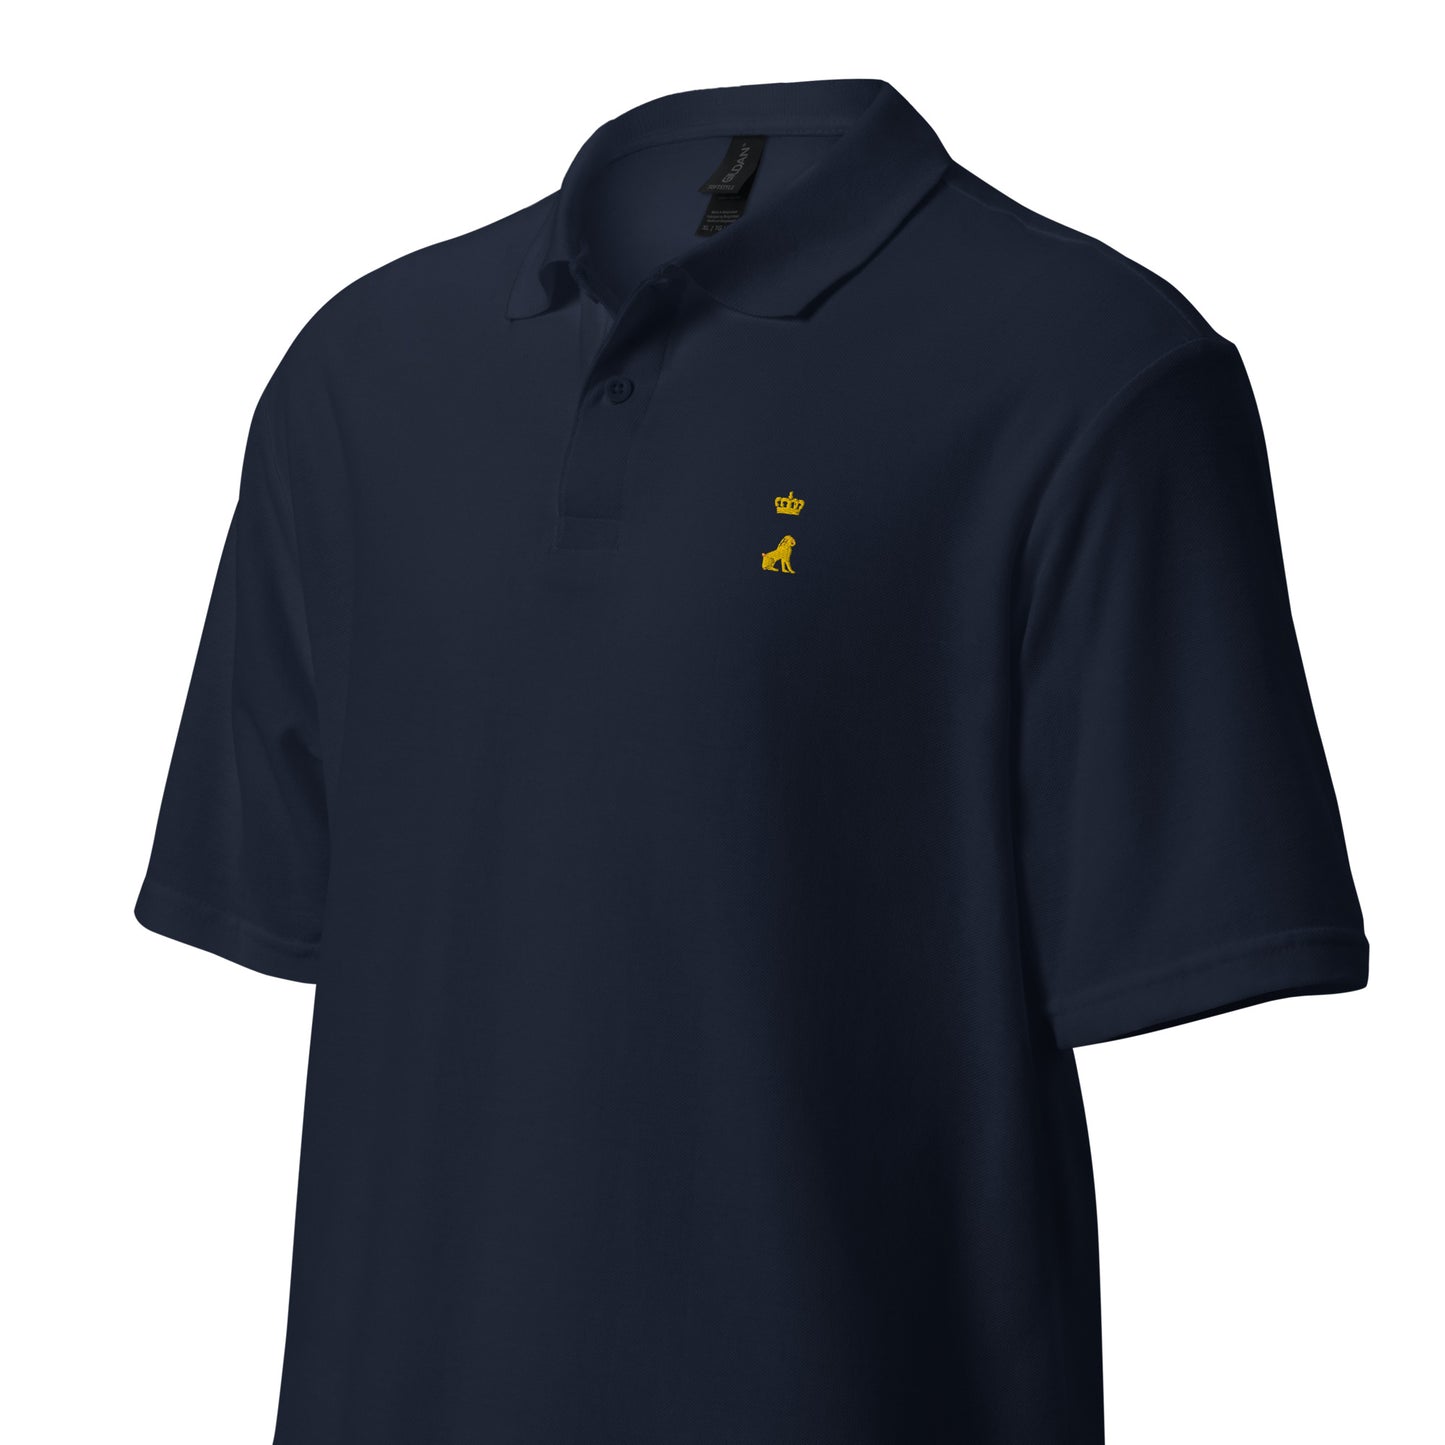 Queen Luise Edition pique polo shirt (unisex | embroidered)